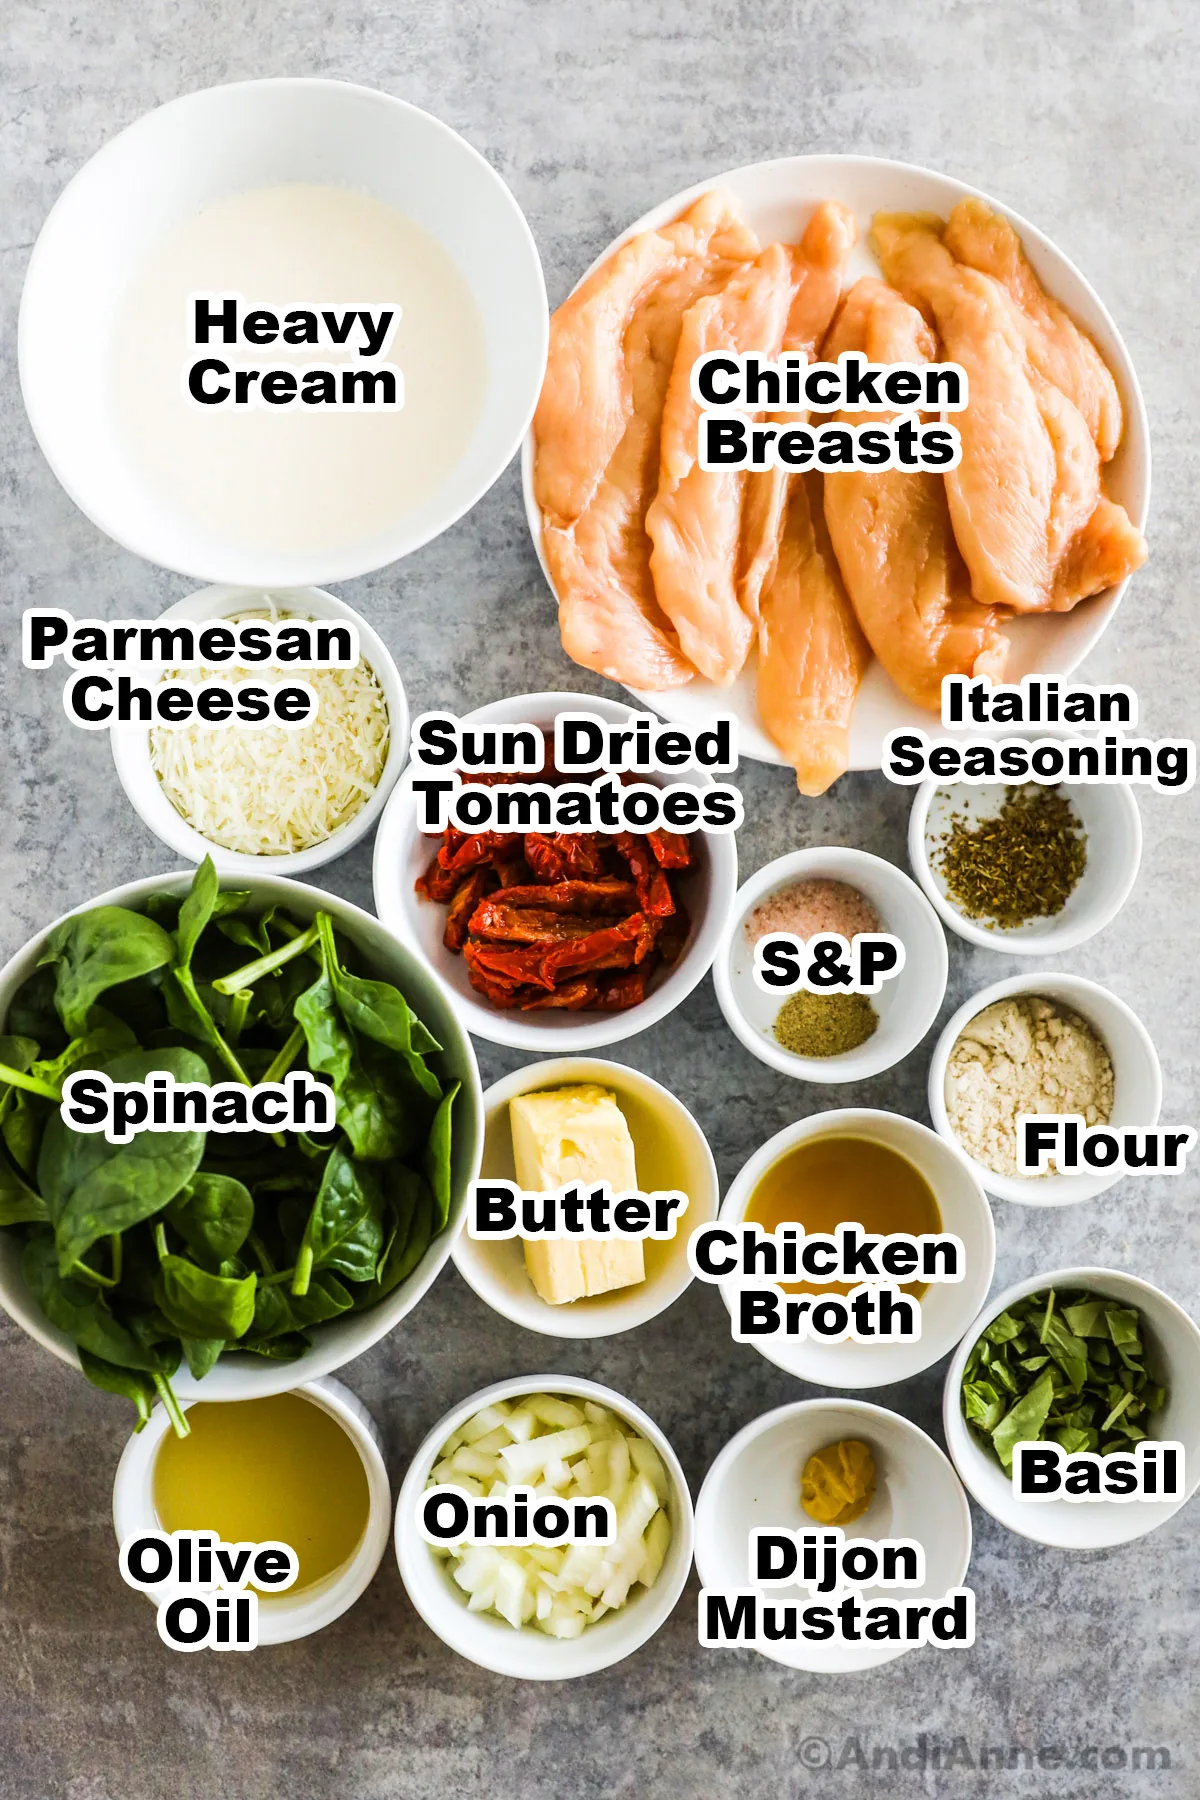 Recipe ingredients on the counter including bowl of heavy cream, sliced chicken breasts, parmesan cheese, sun dried tomatoes, spinach, spices, butter, broth, oil, and flour.